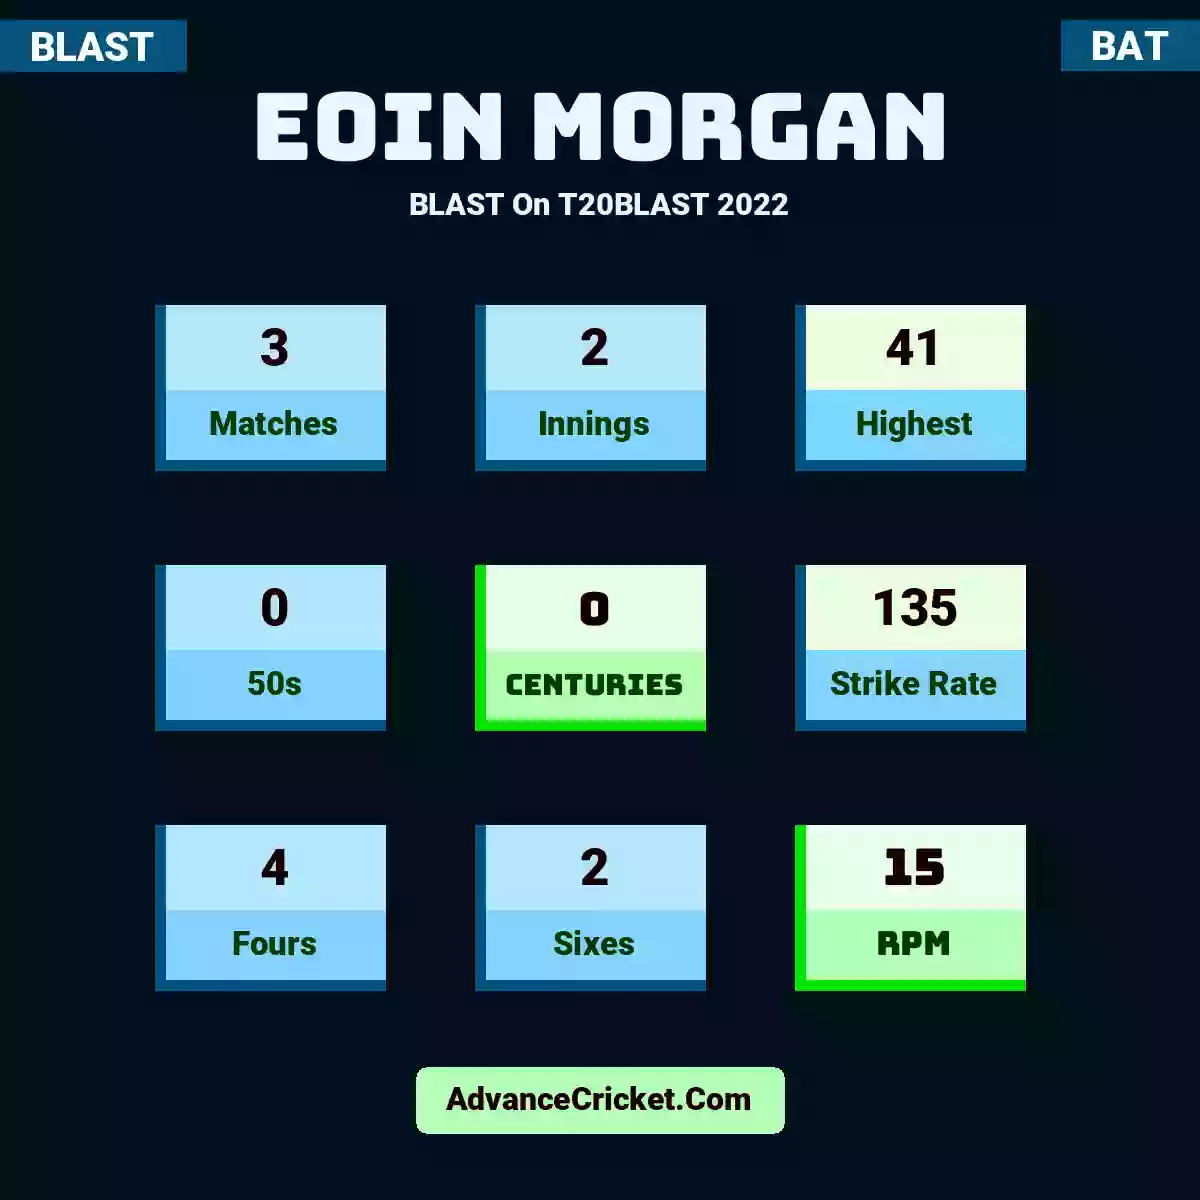 Eoin Morgan BLAST  On T20BLAST 2022, Eoin Morgan played 3 matches, scored 41 runs as highest, 0 half-centuries, and 0 centuries, with a strike rate of 135. E.Morgan hit 4 fours and 2 sixes, with an RPM of 15.